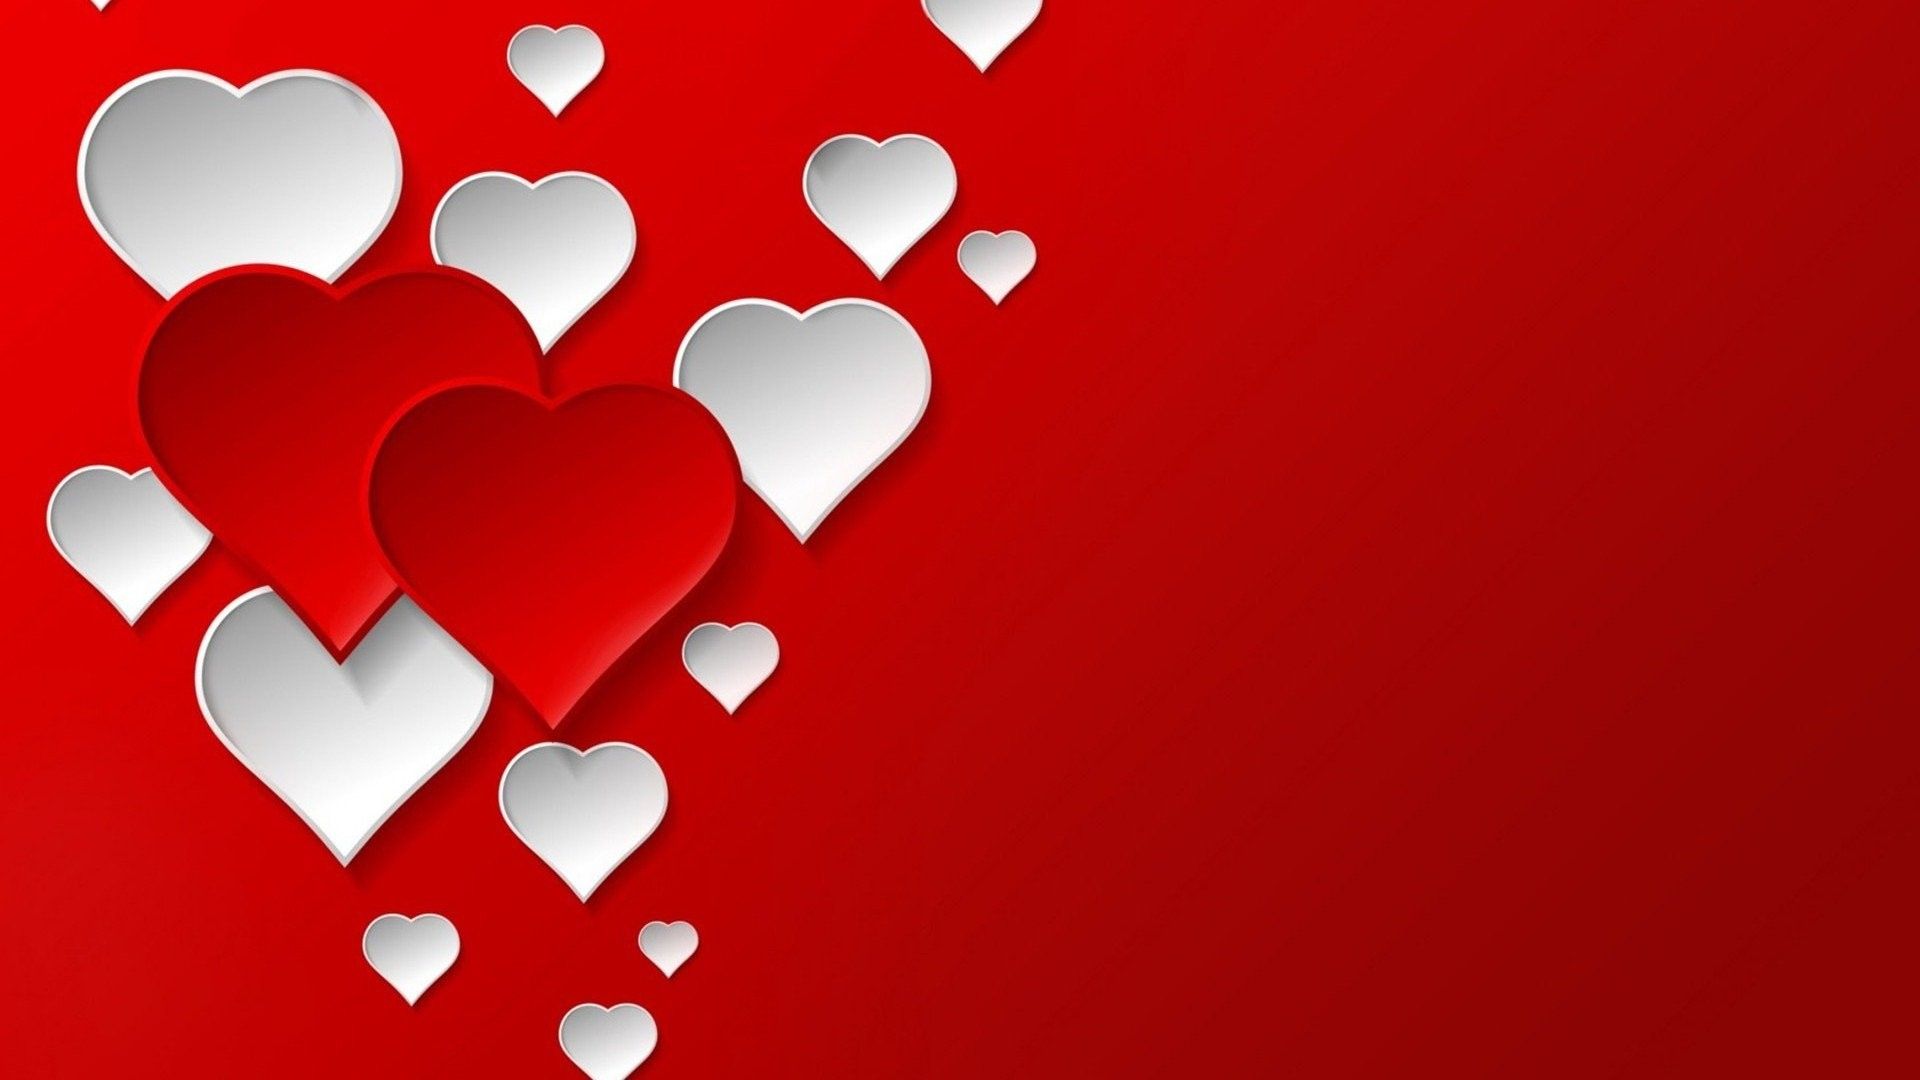 Valentine hearts wallpapers Gallery